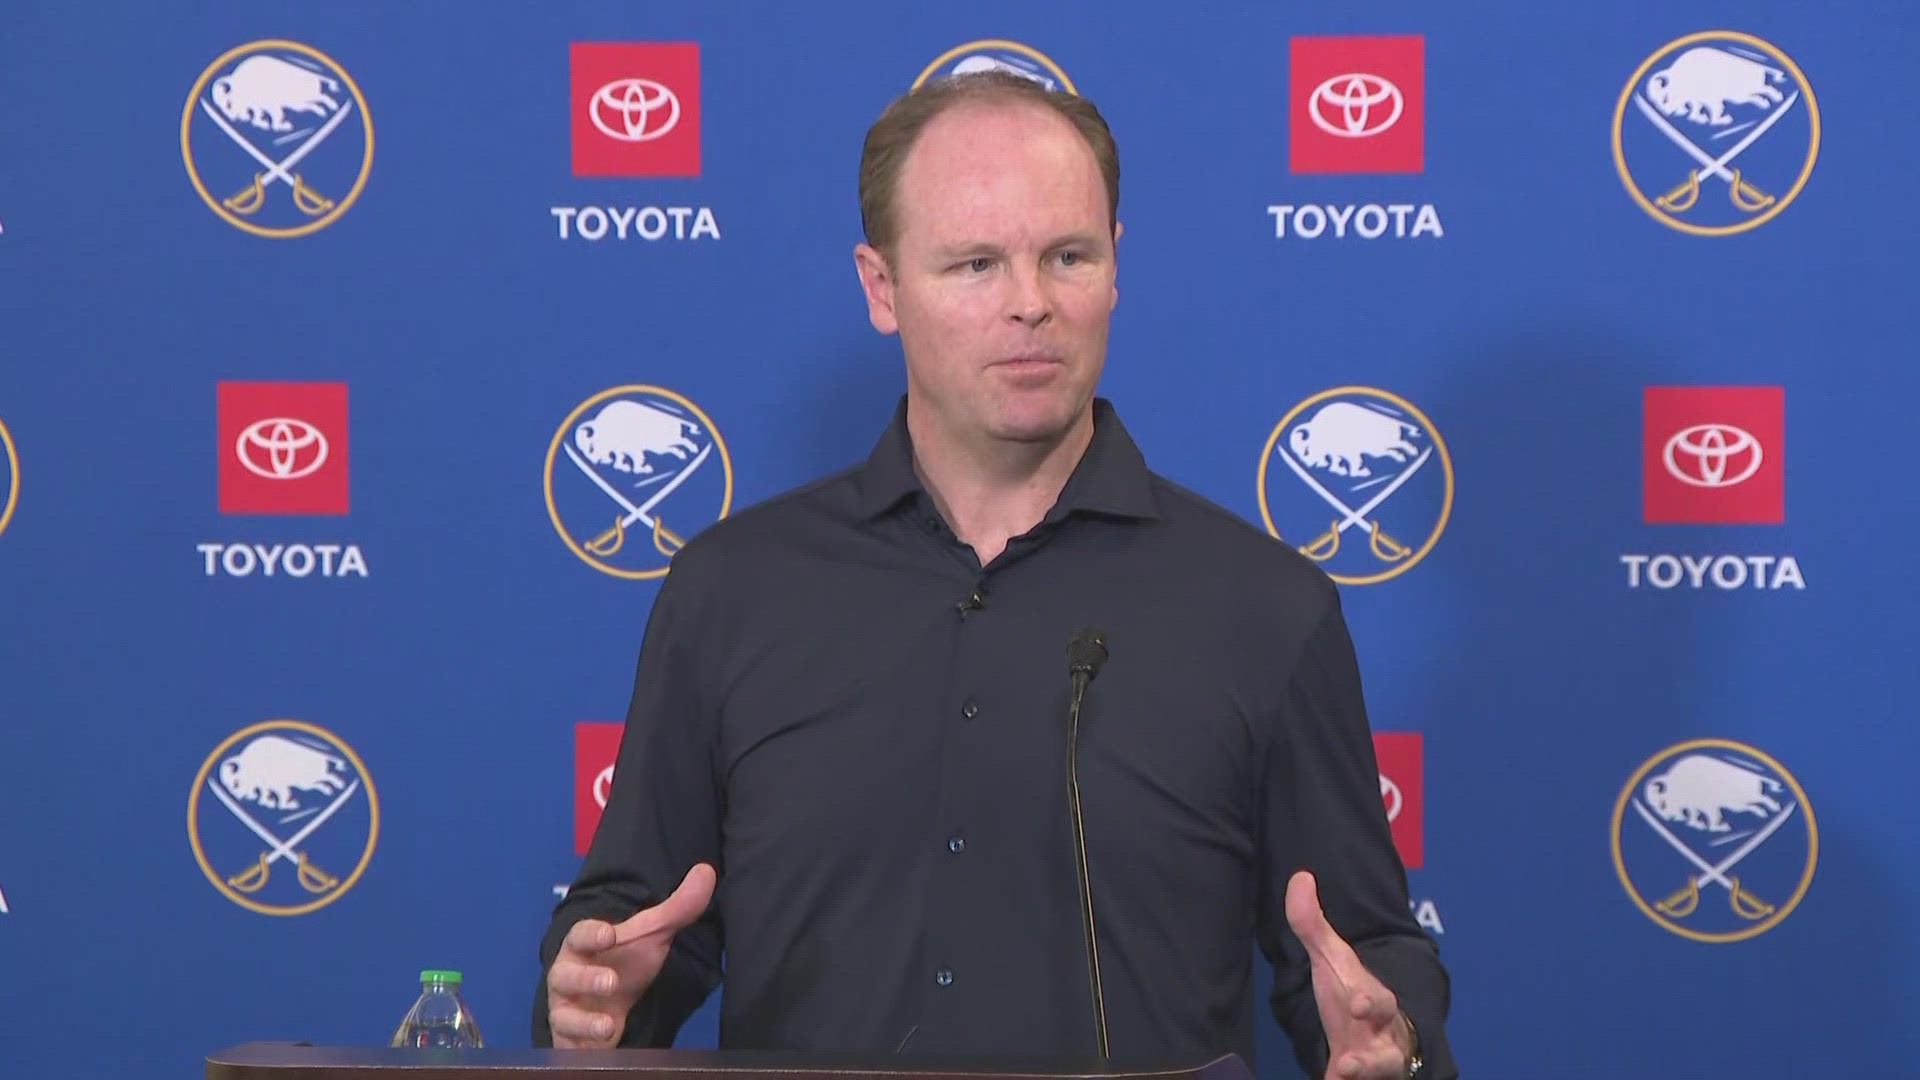 Buffalo Sabres general manager Kevyn Adams talked to the media after the NHL trade deadline passed at 3 p.m. Friday.